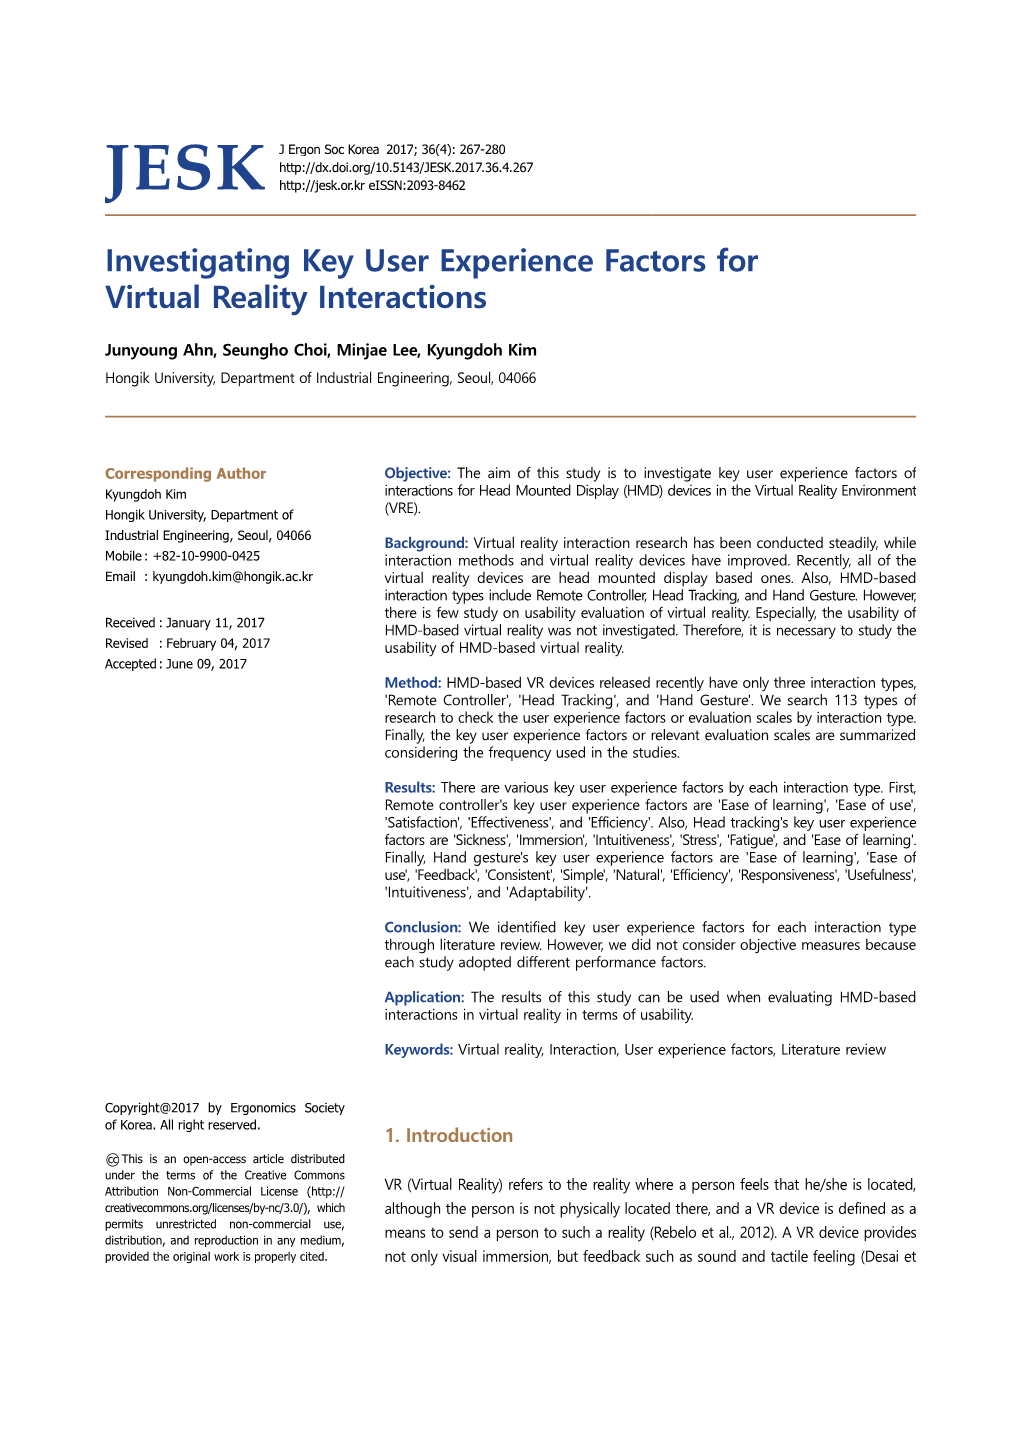 Investigating Key User Experience Factors for Virtual Reality Interactions